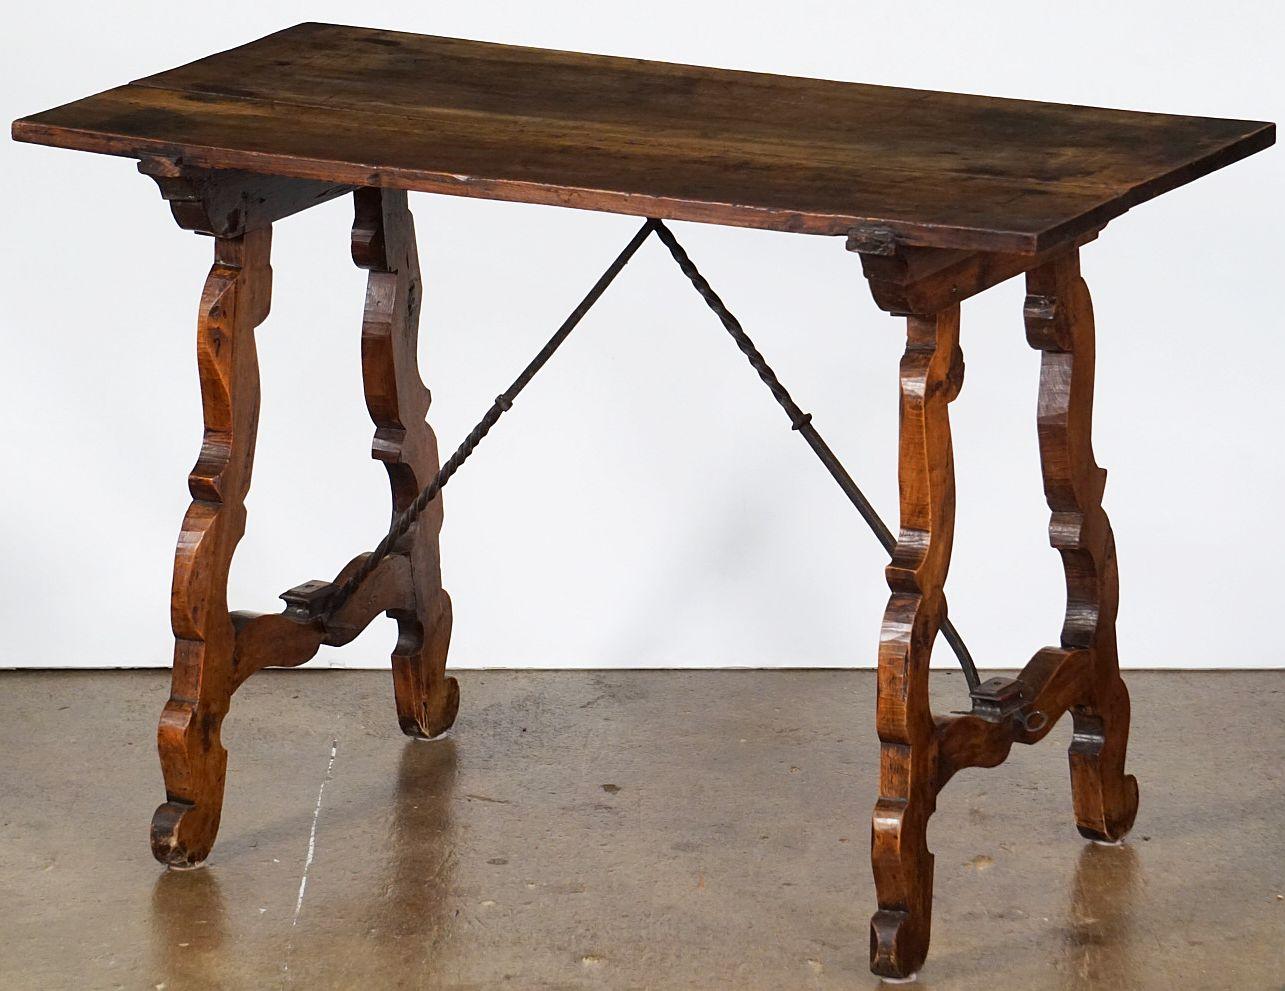 A fine Spanish console or trestle table of patinated walnut, in the rustic Baroque style, featuring a rectangular plank top over a frieze of two turned serpentine wood supports with wrought ironwork braces in a cross-bar design.